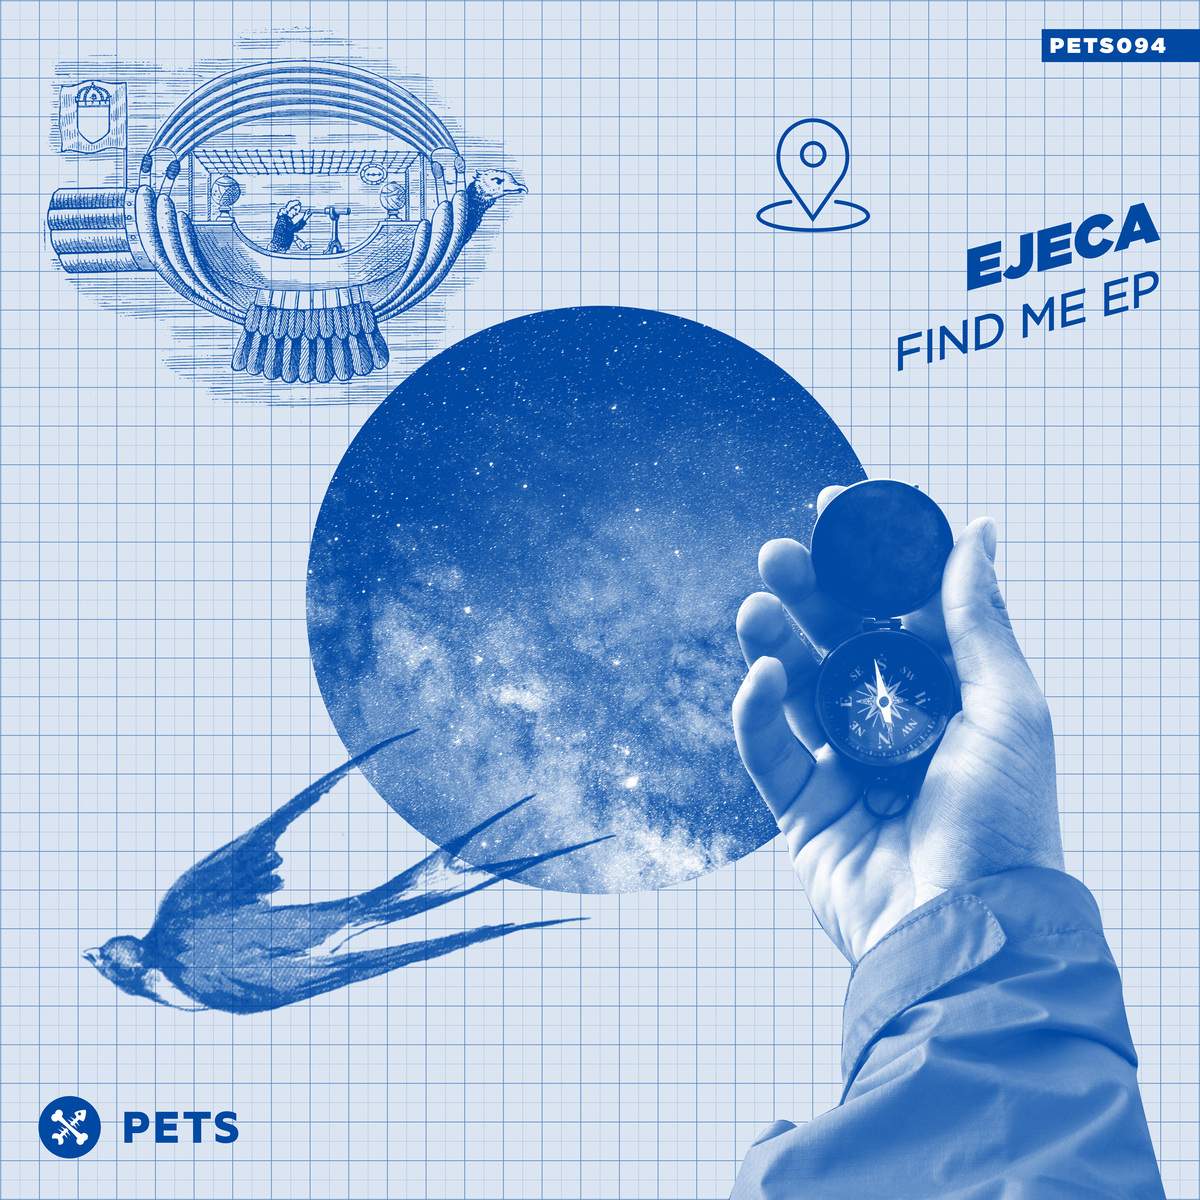 EJECA - Find Me (EP) / Pets Recordings